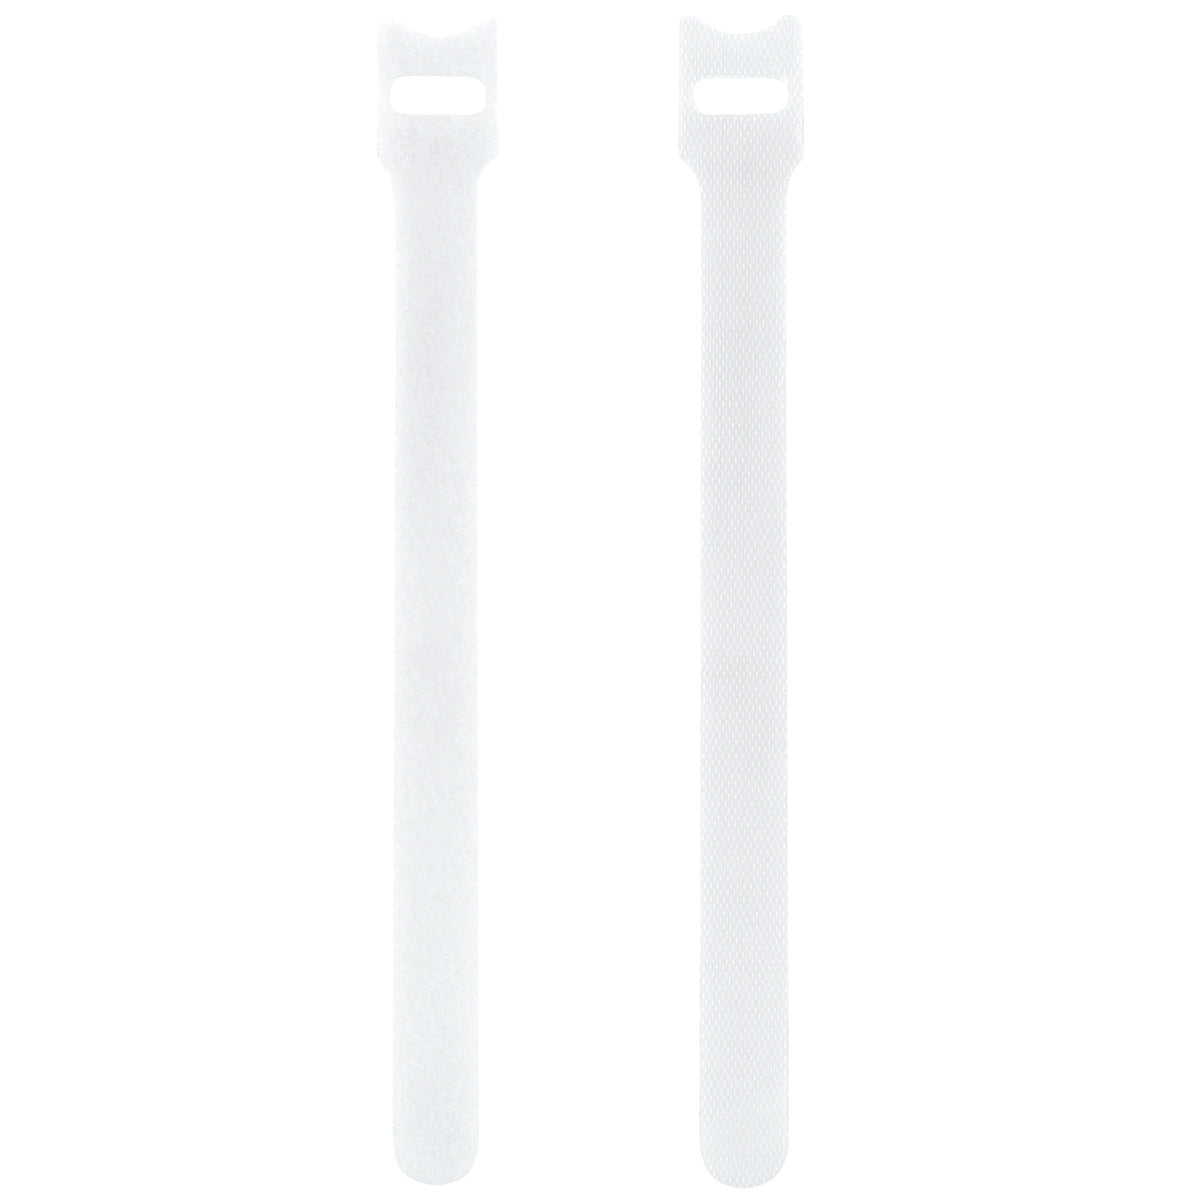 Displaying of two upright white nylon cable ties  